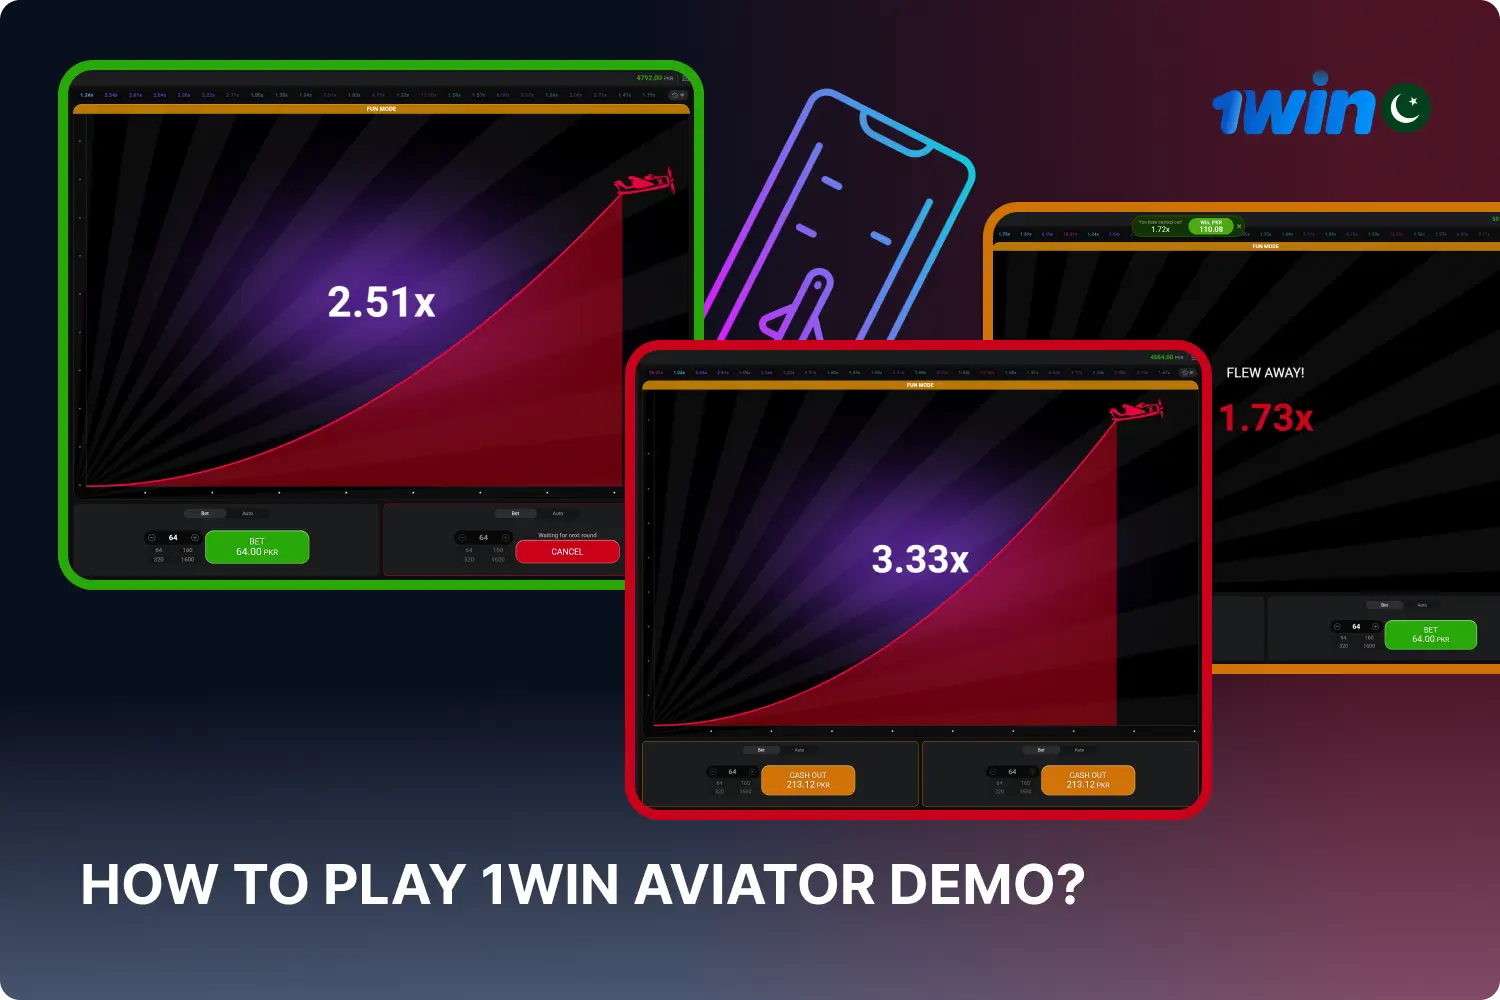 1win users can play Aviator without the risk of losing real money by using the demo mode, just follow a few simple steps to do so